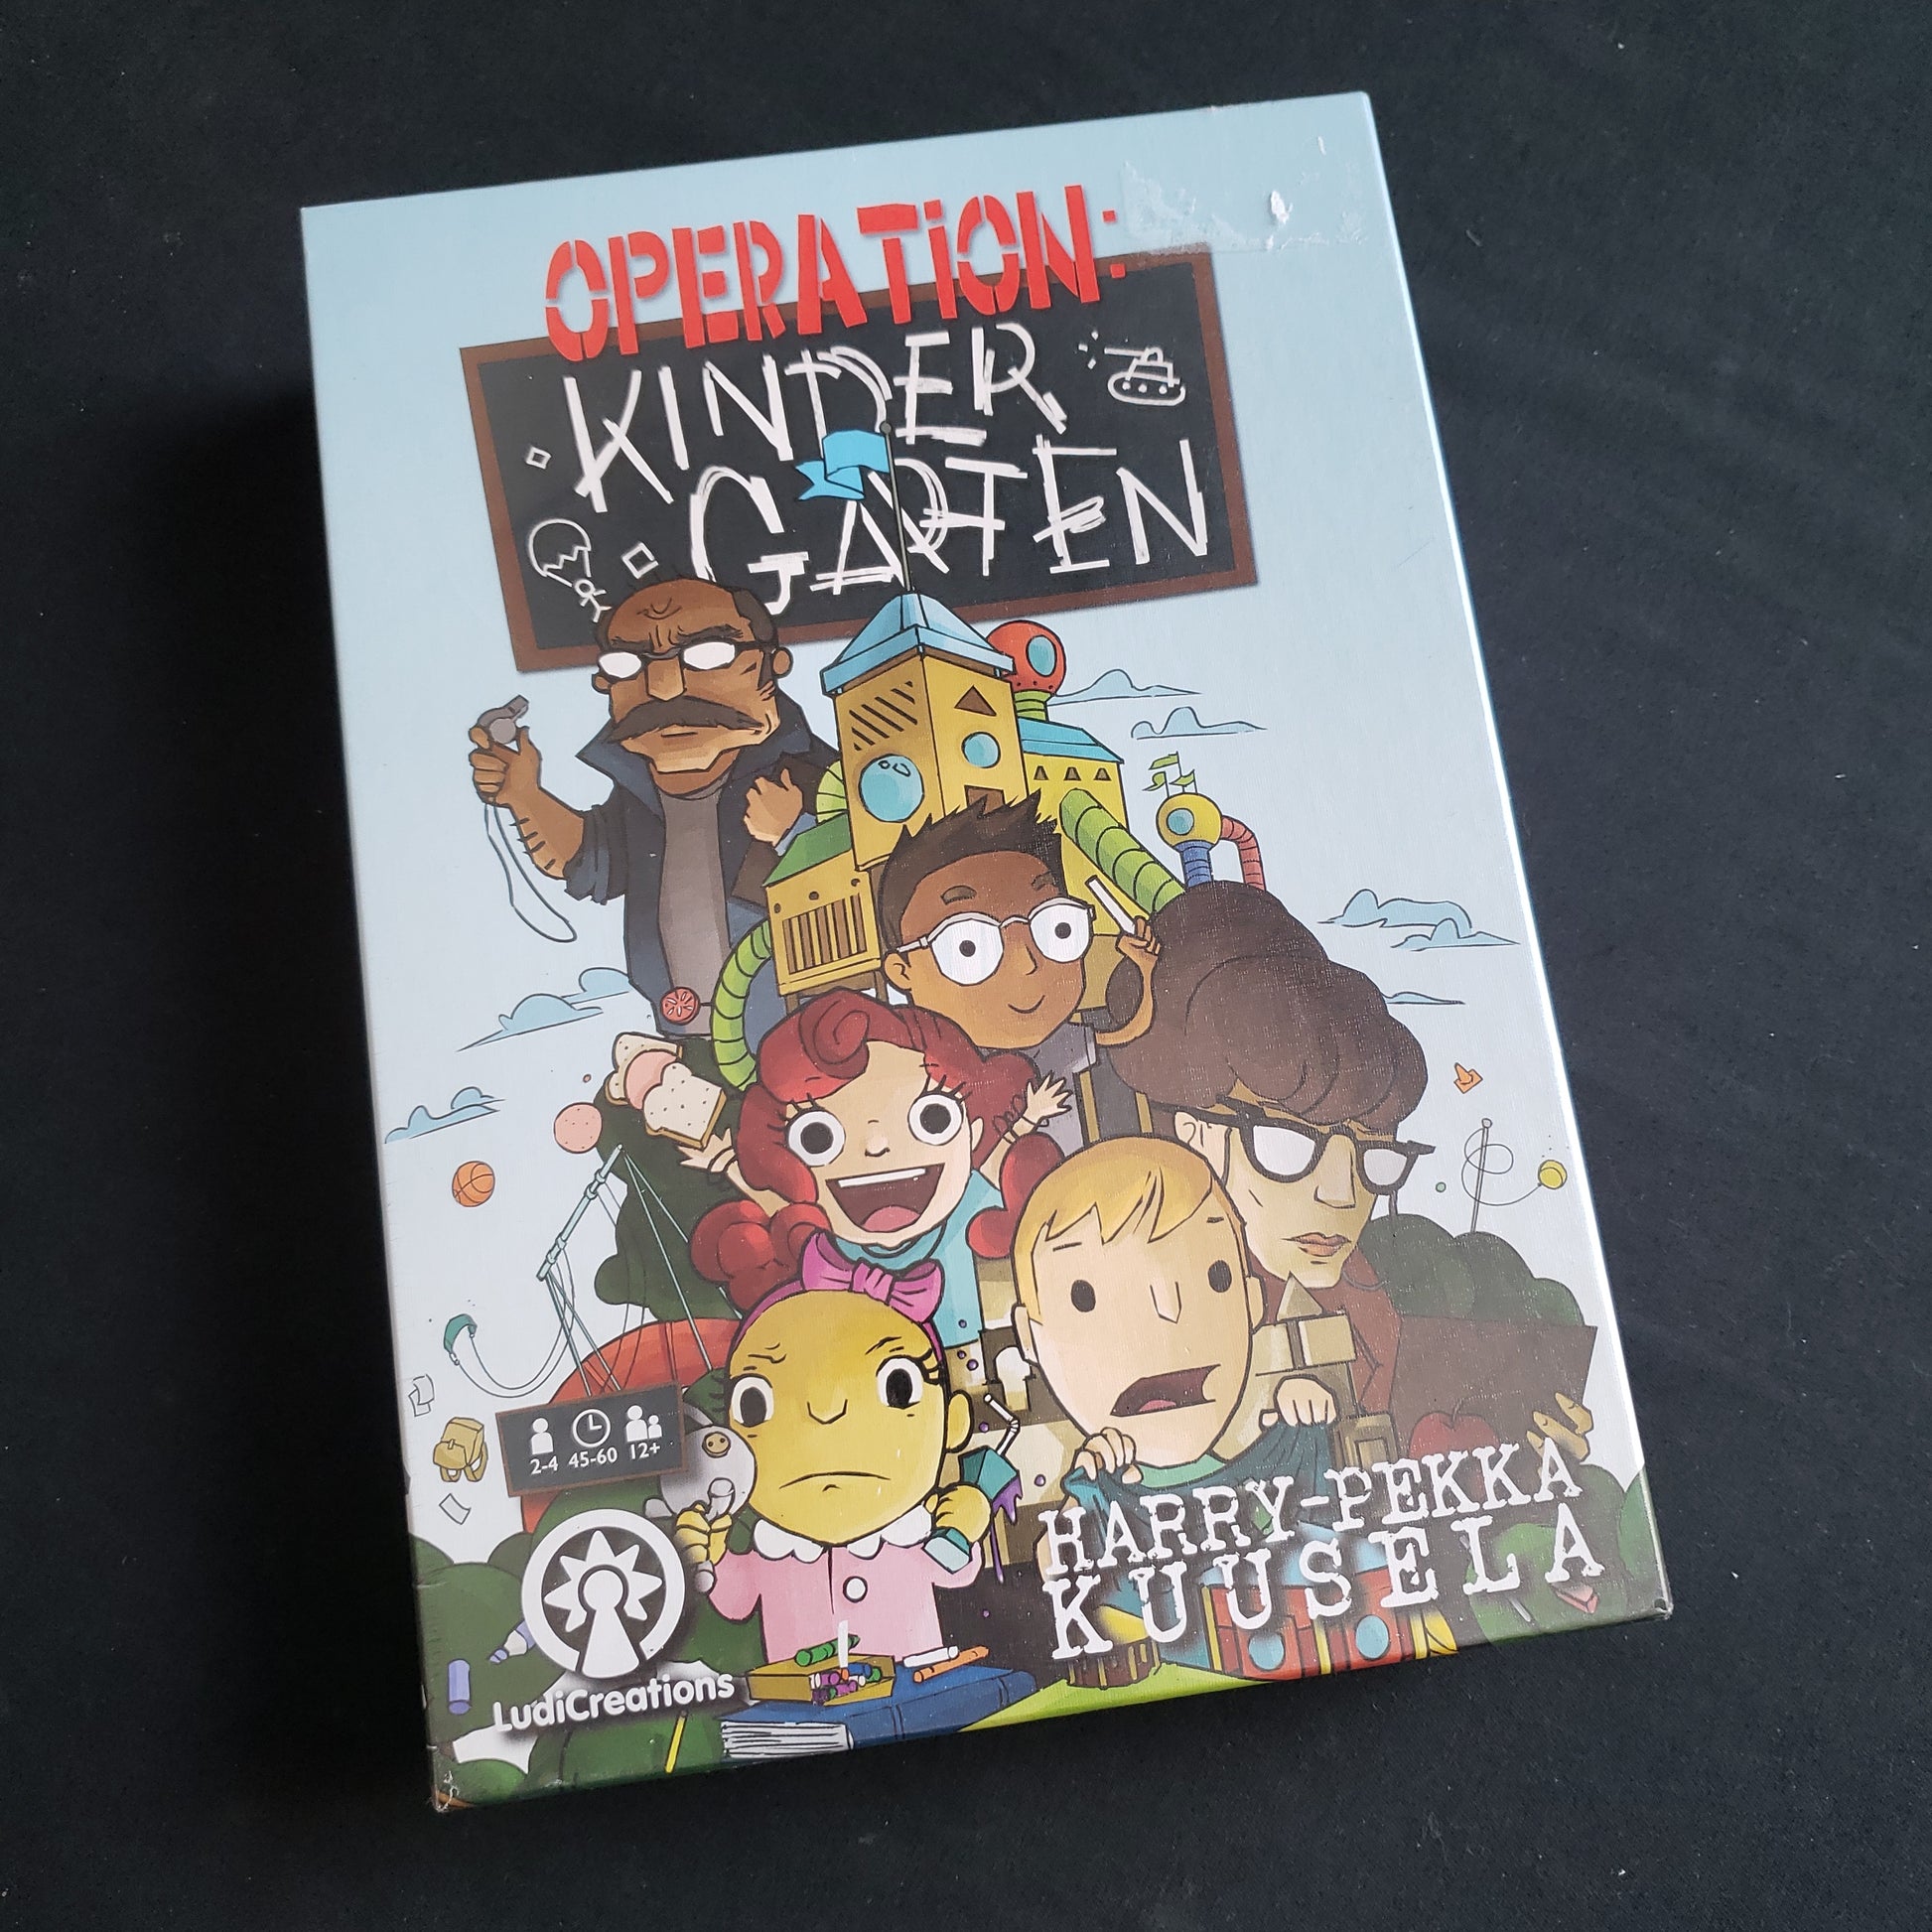 Image shows the front cover of the box of the Operation Kindergarten board game